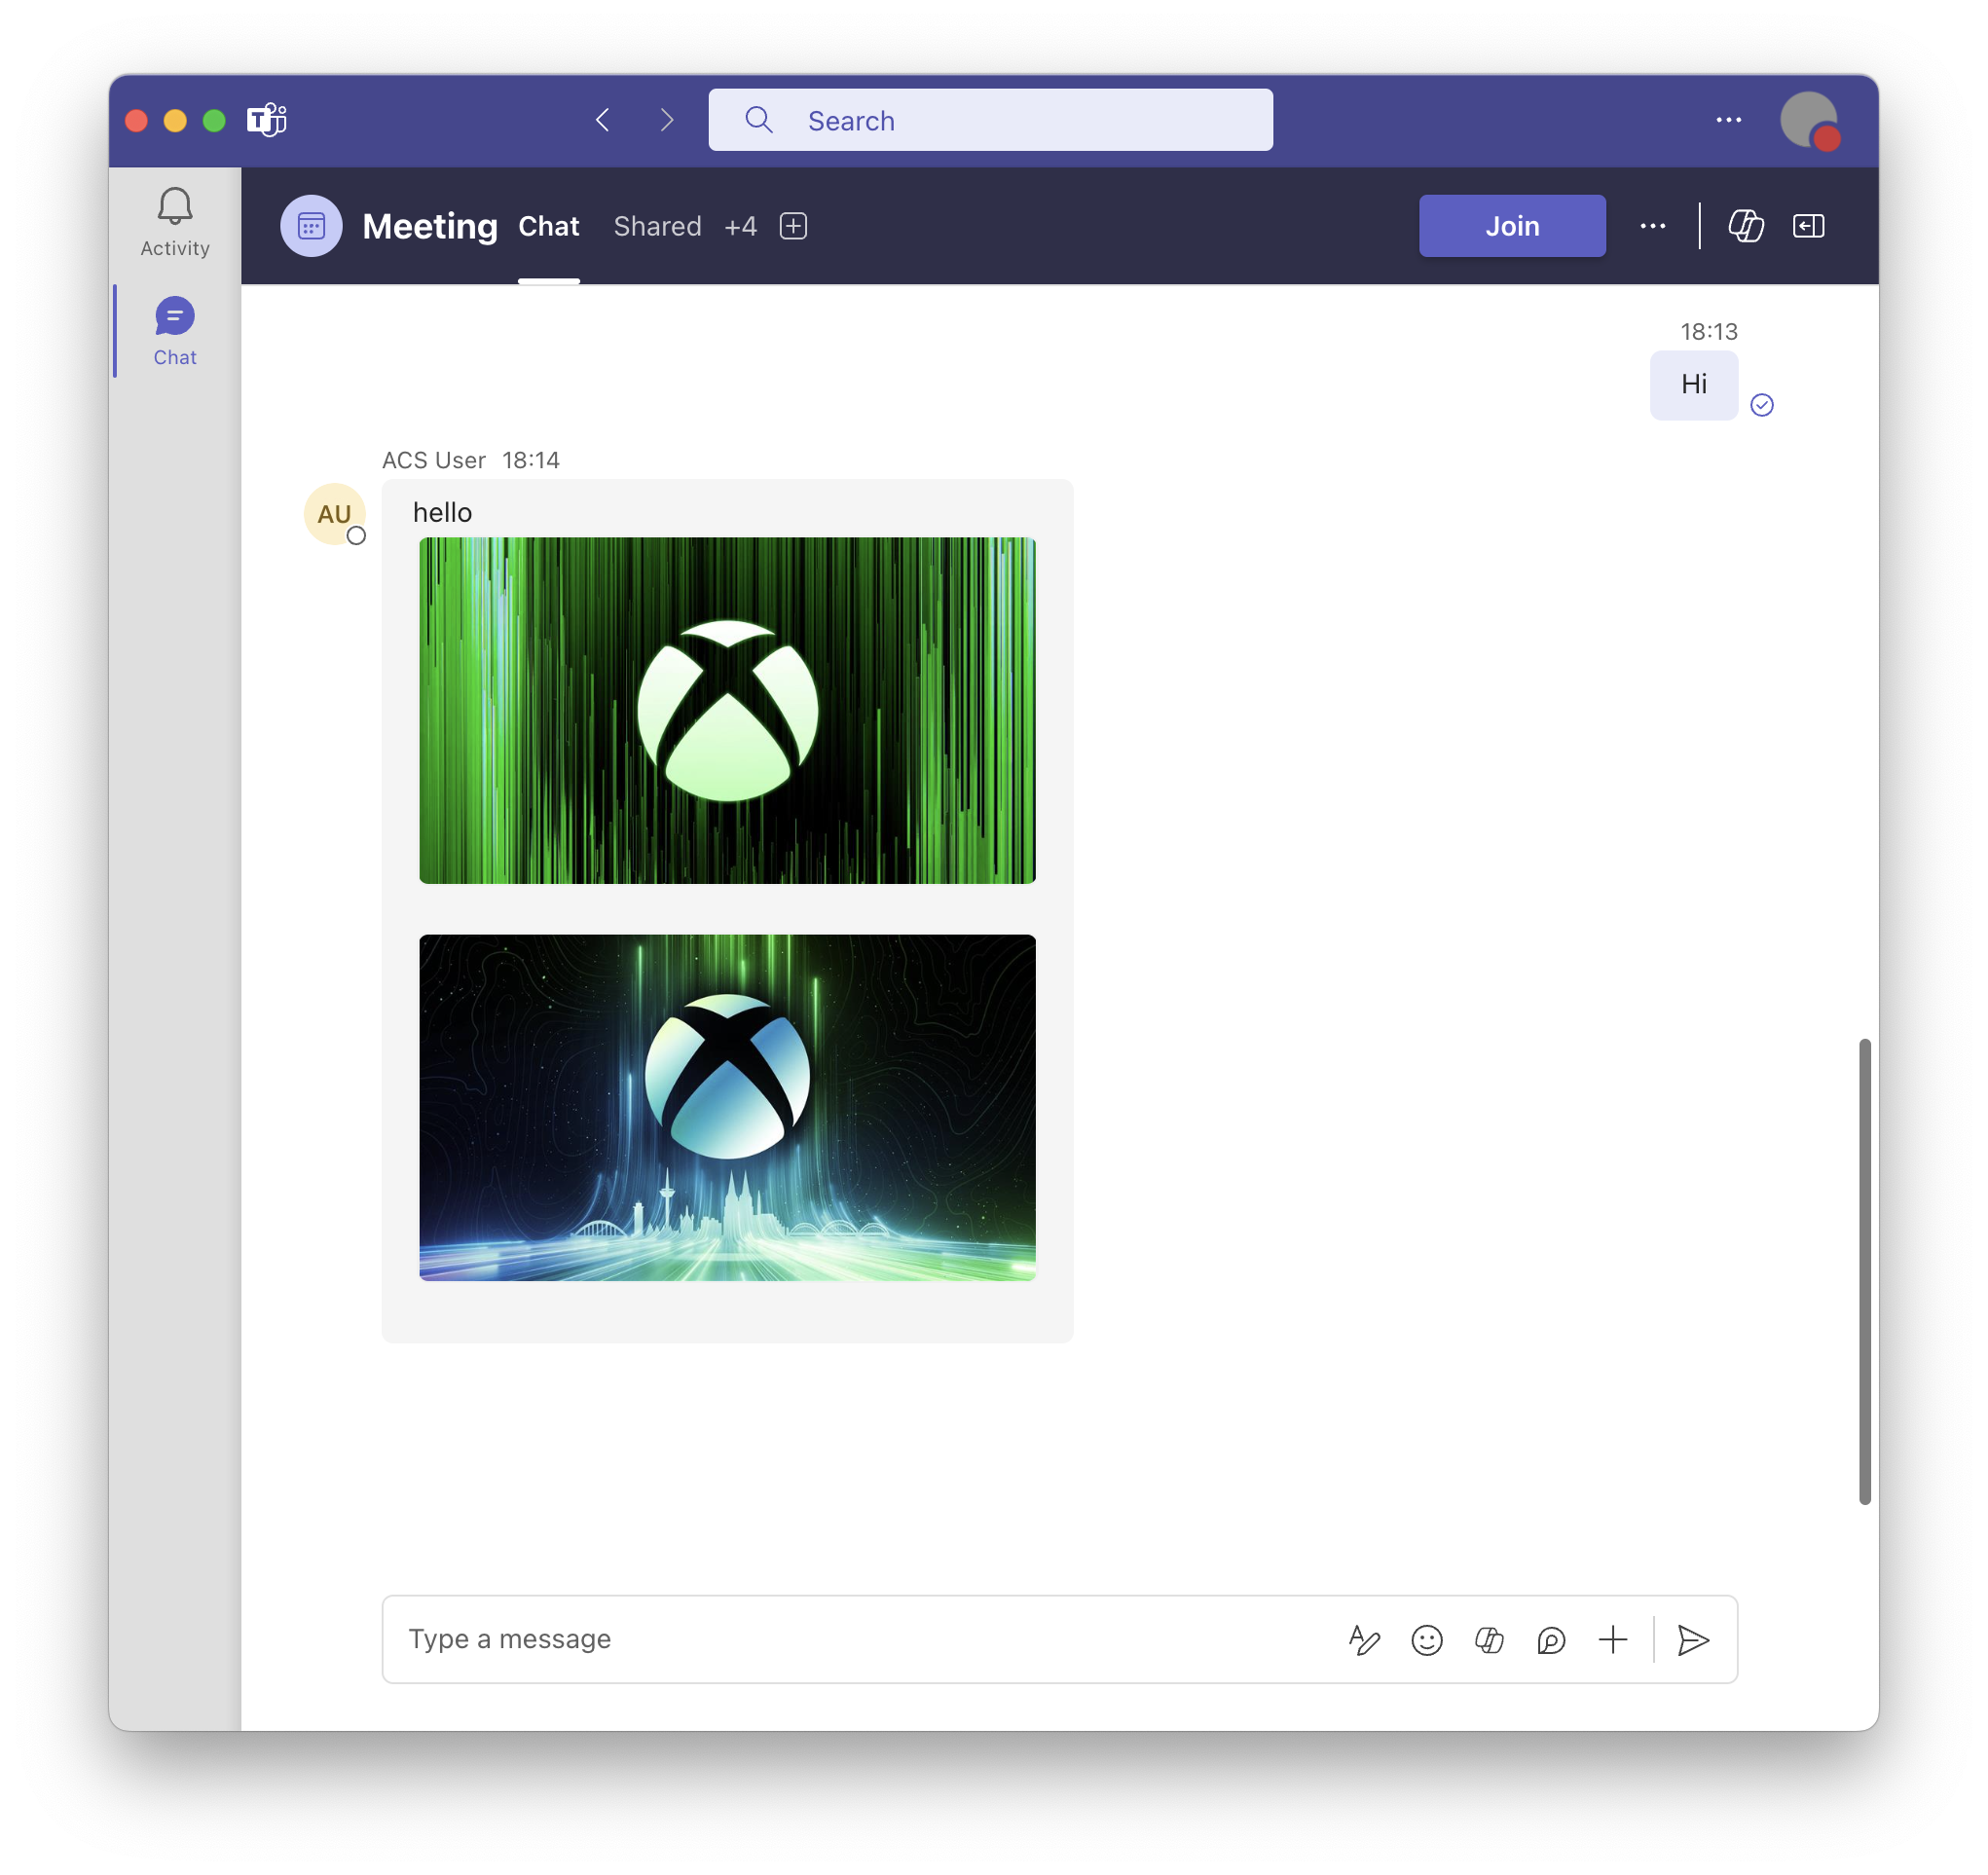 A screenshot of Teams client showing a received message with 2 image embedded.